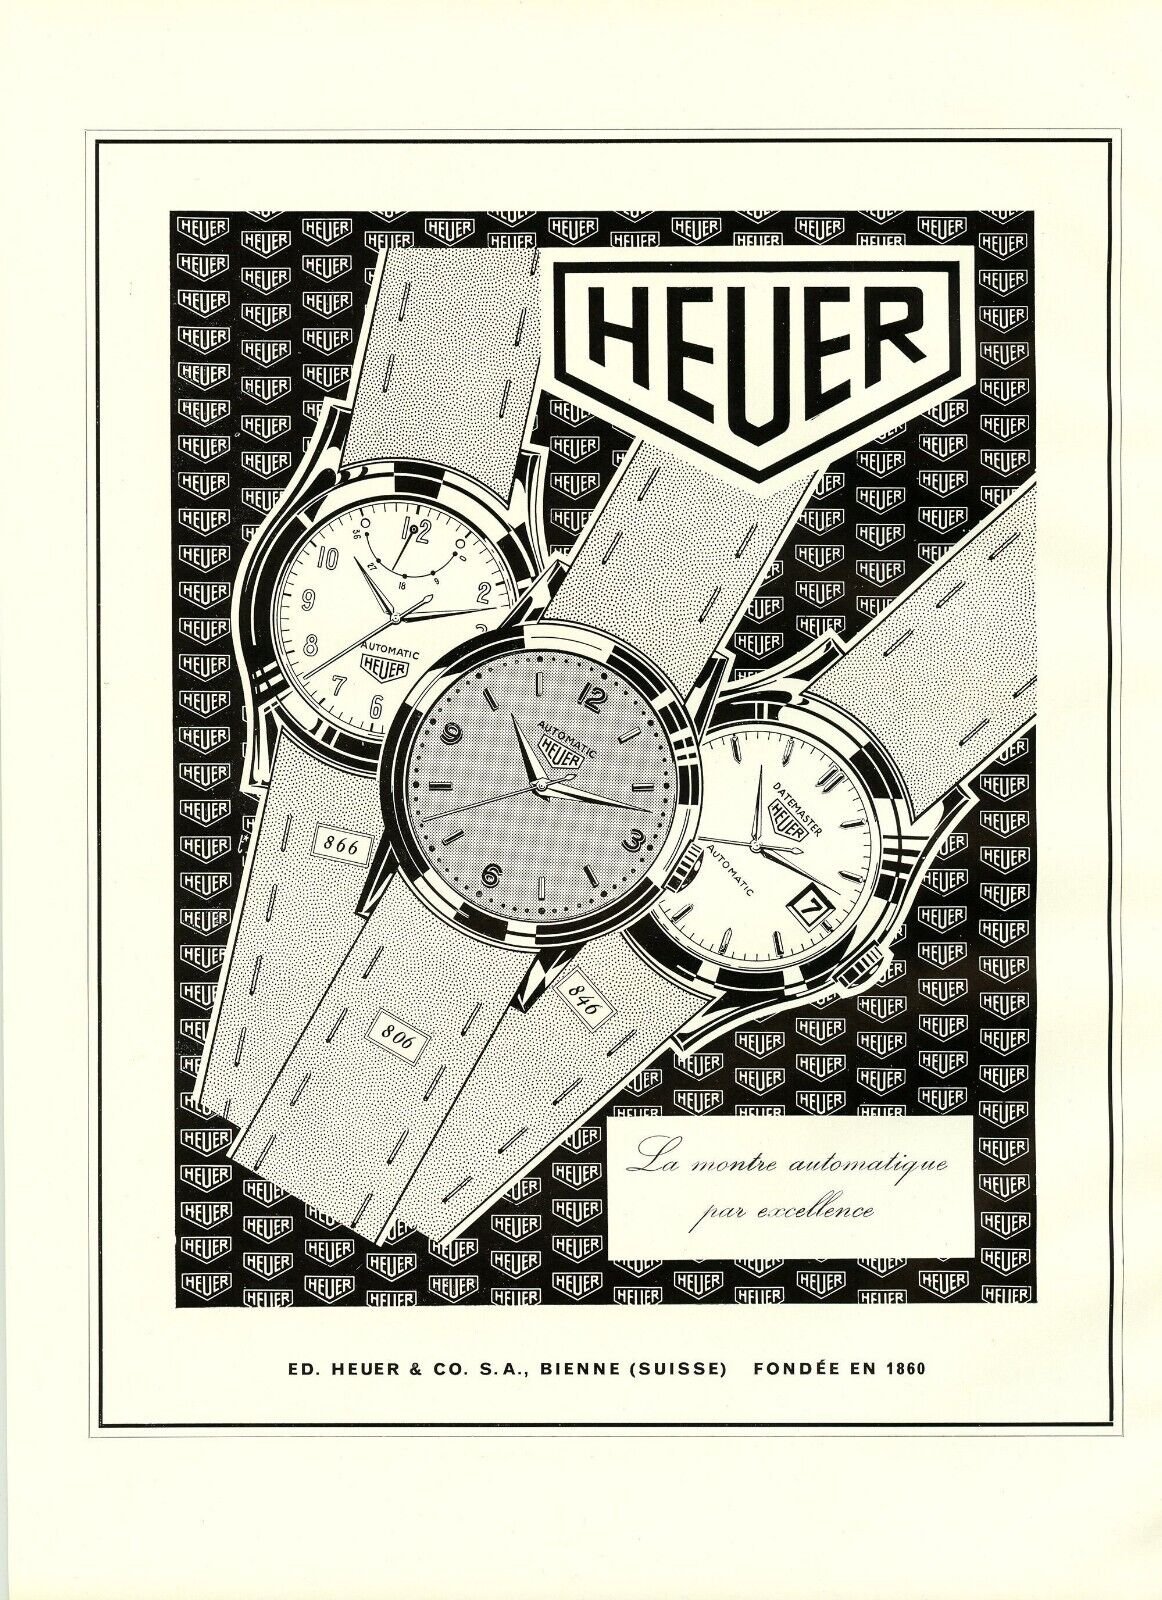 Tag Heuer Watch REPRINT vintage classic ad 11x15 Poster Luxury wall art